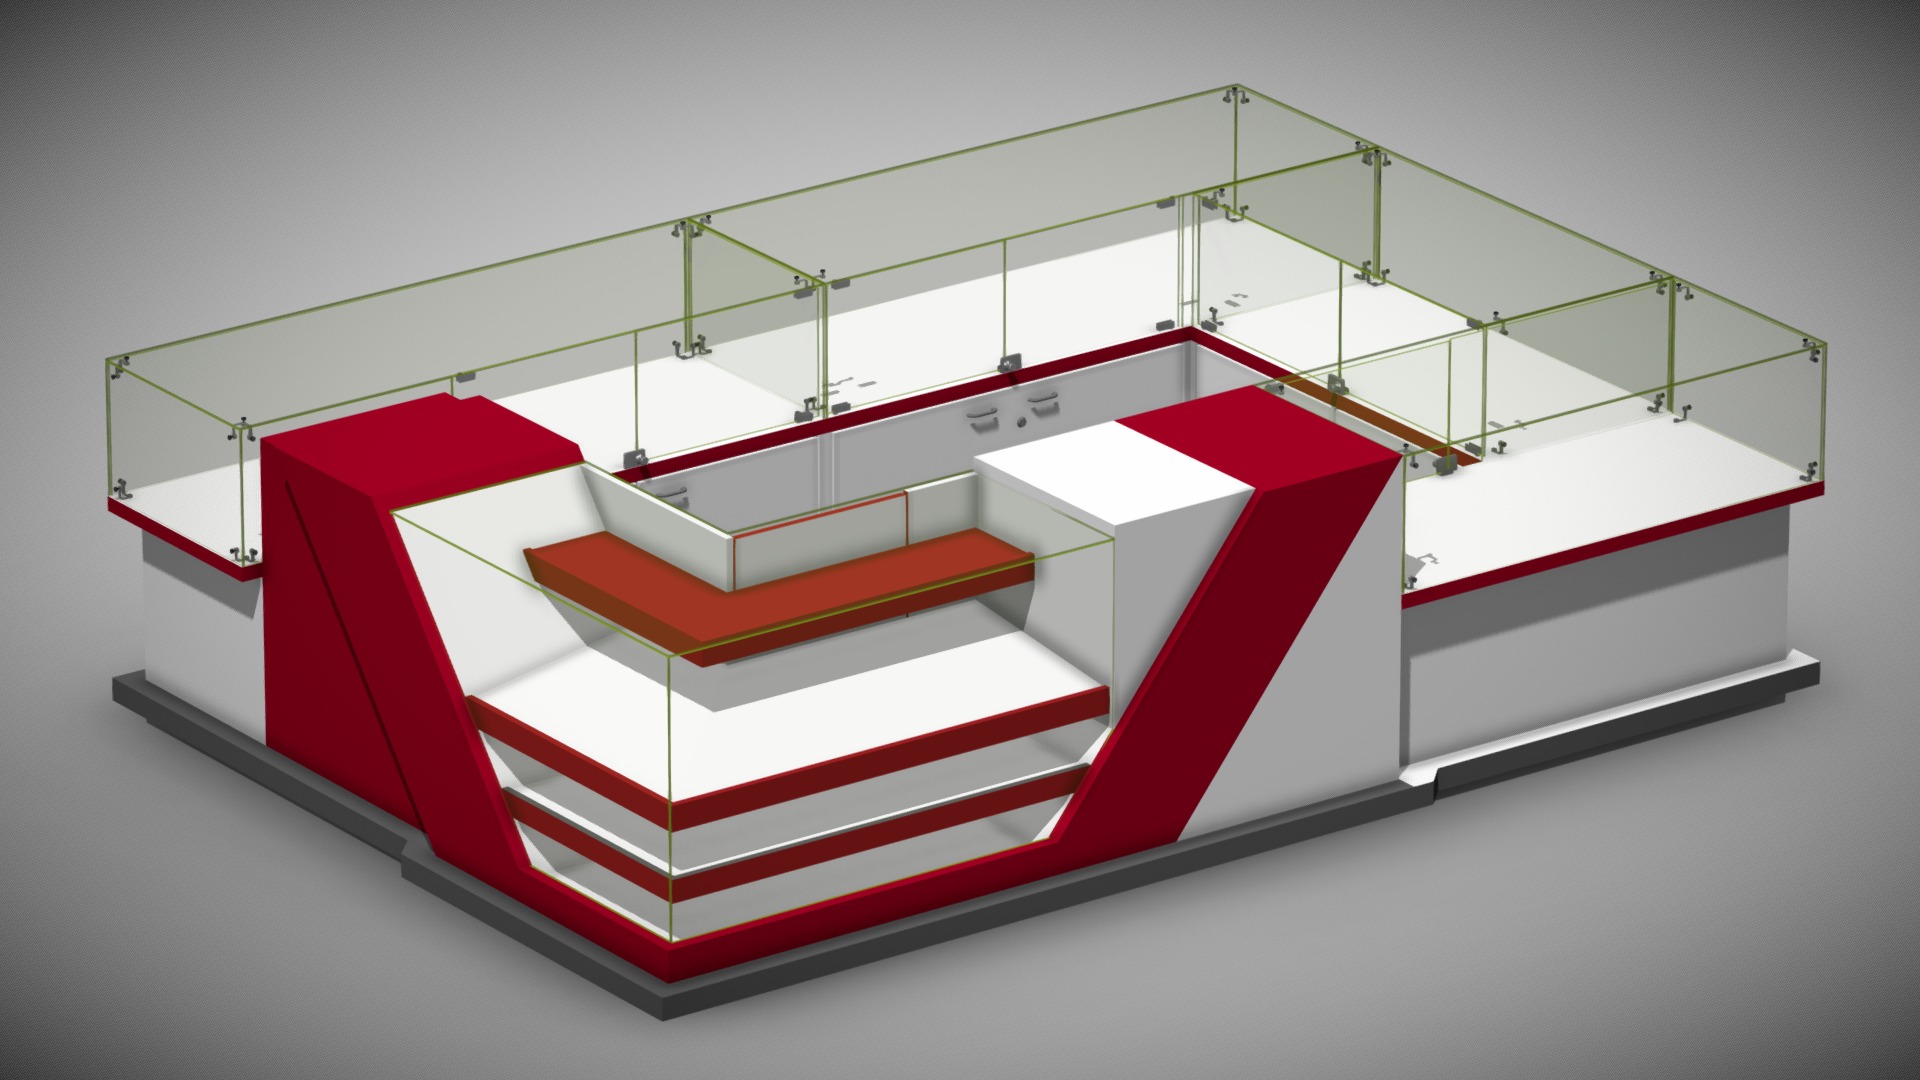 3D model Kiosk 2018 - This is a 3D model of the Kiosk 2018. The 3D model is about a red and white bed frame.